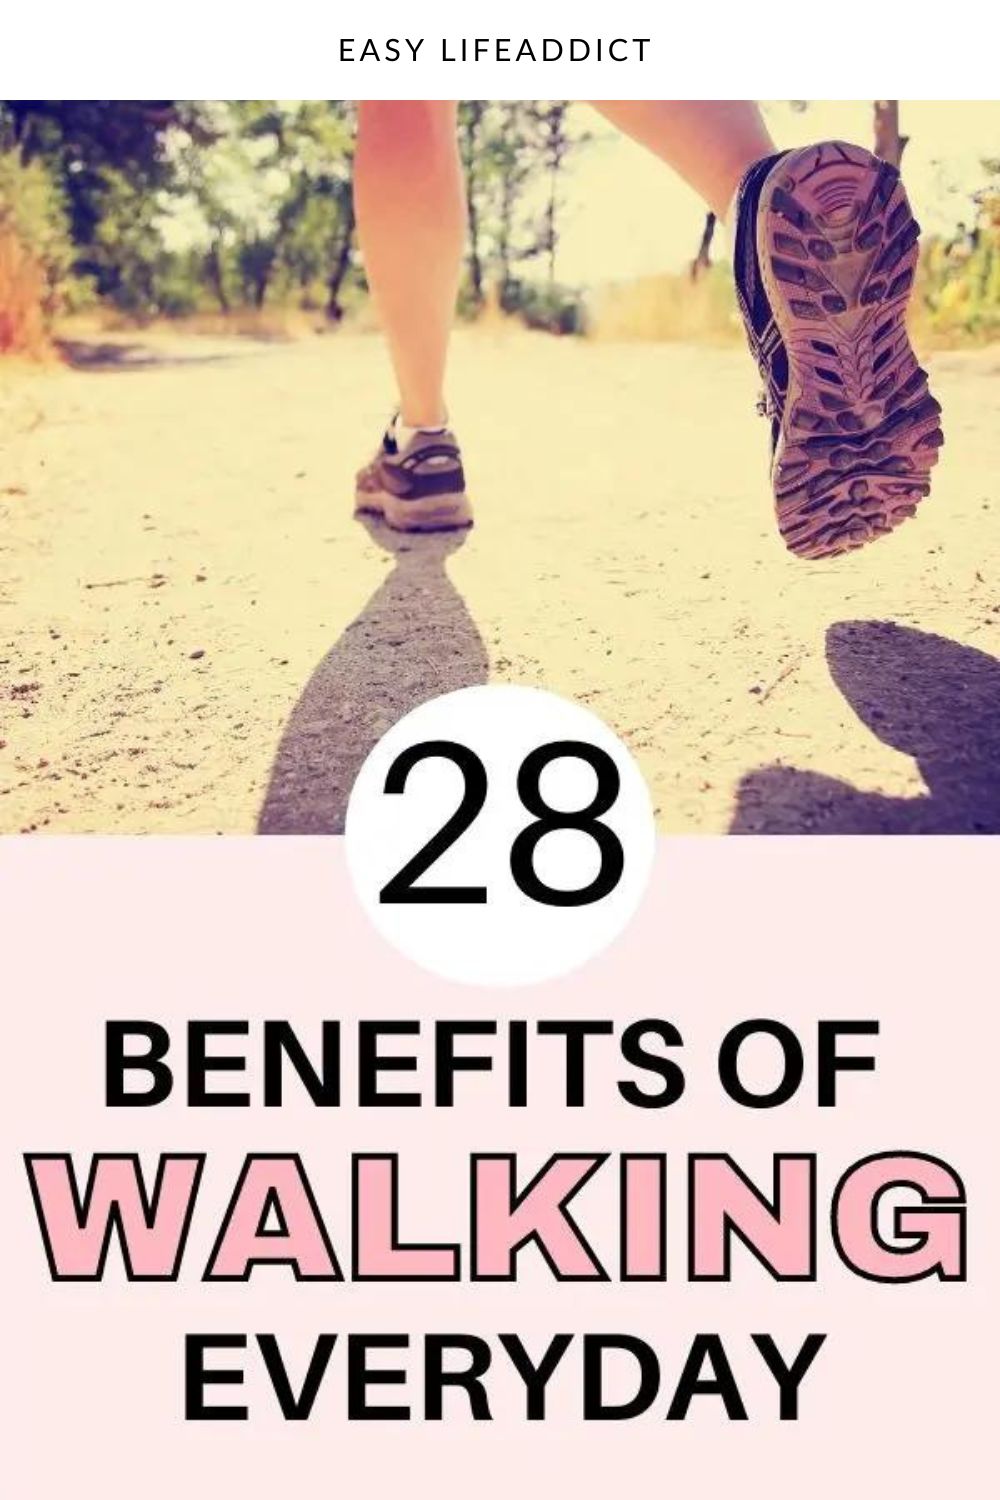 28 Proven Benefits Of Walking Every Day! - Easy Life Addict